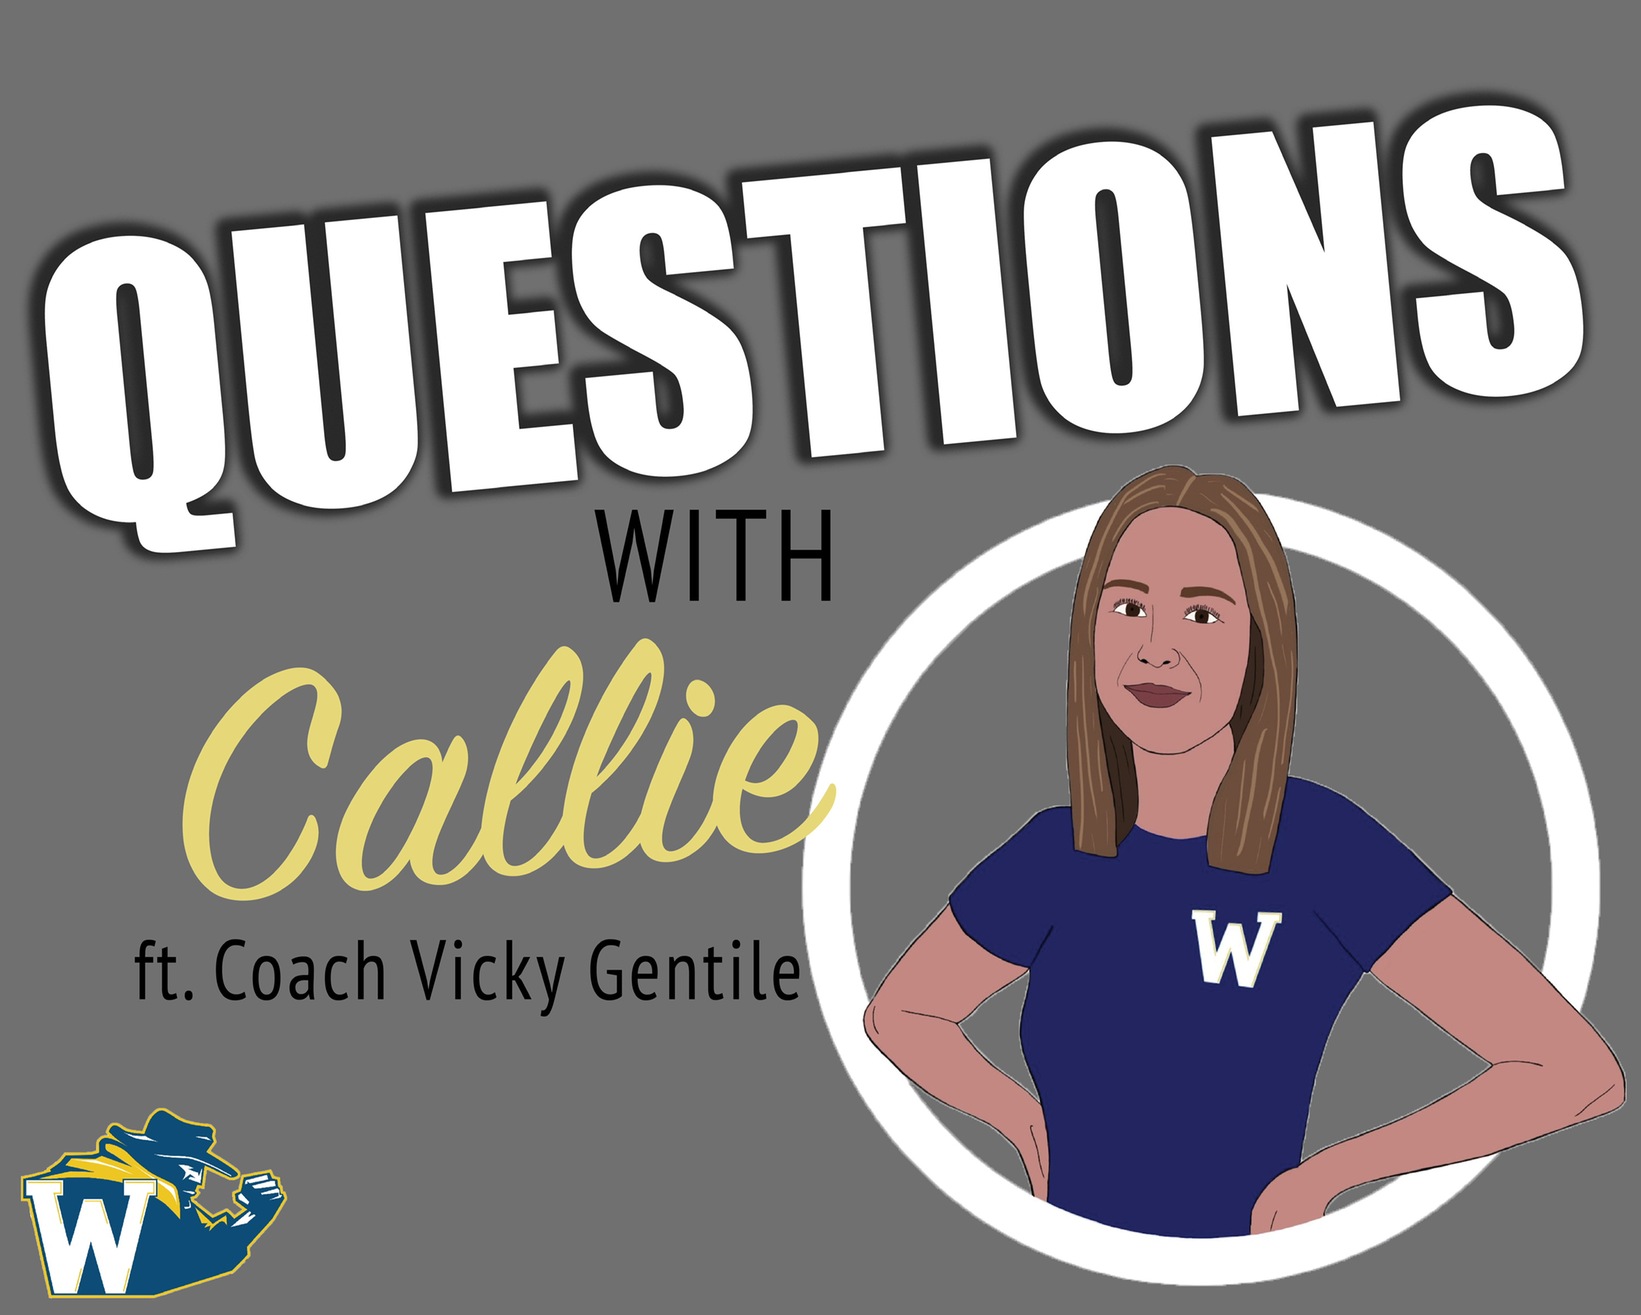 Questions with Callie Ep. 2 Featuring Volleyball Coach